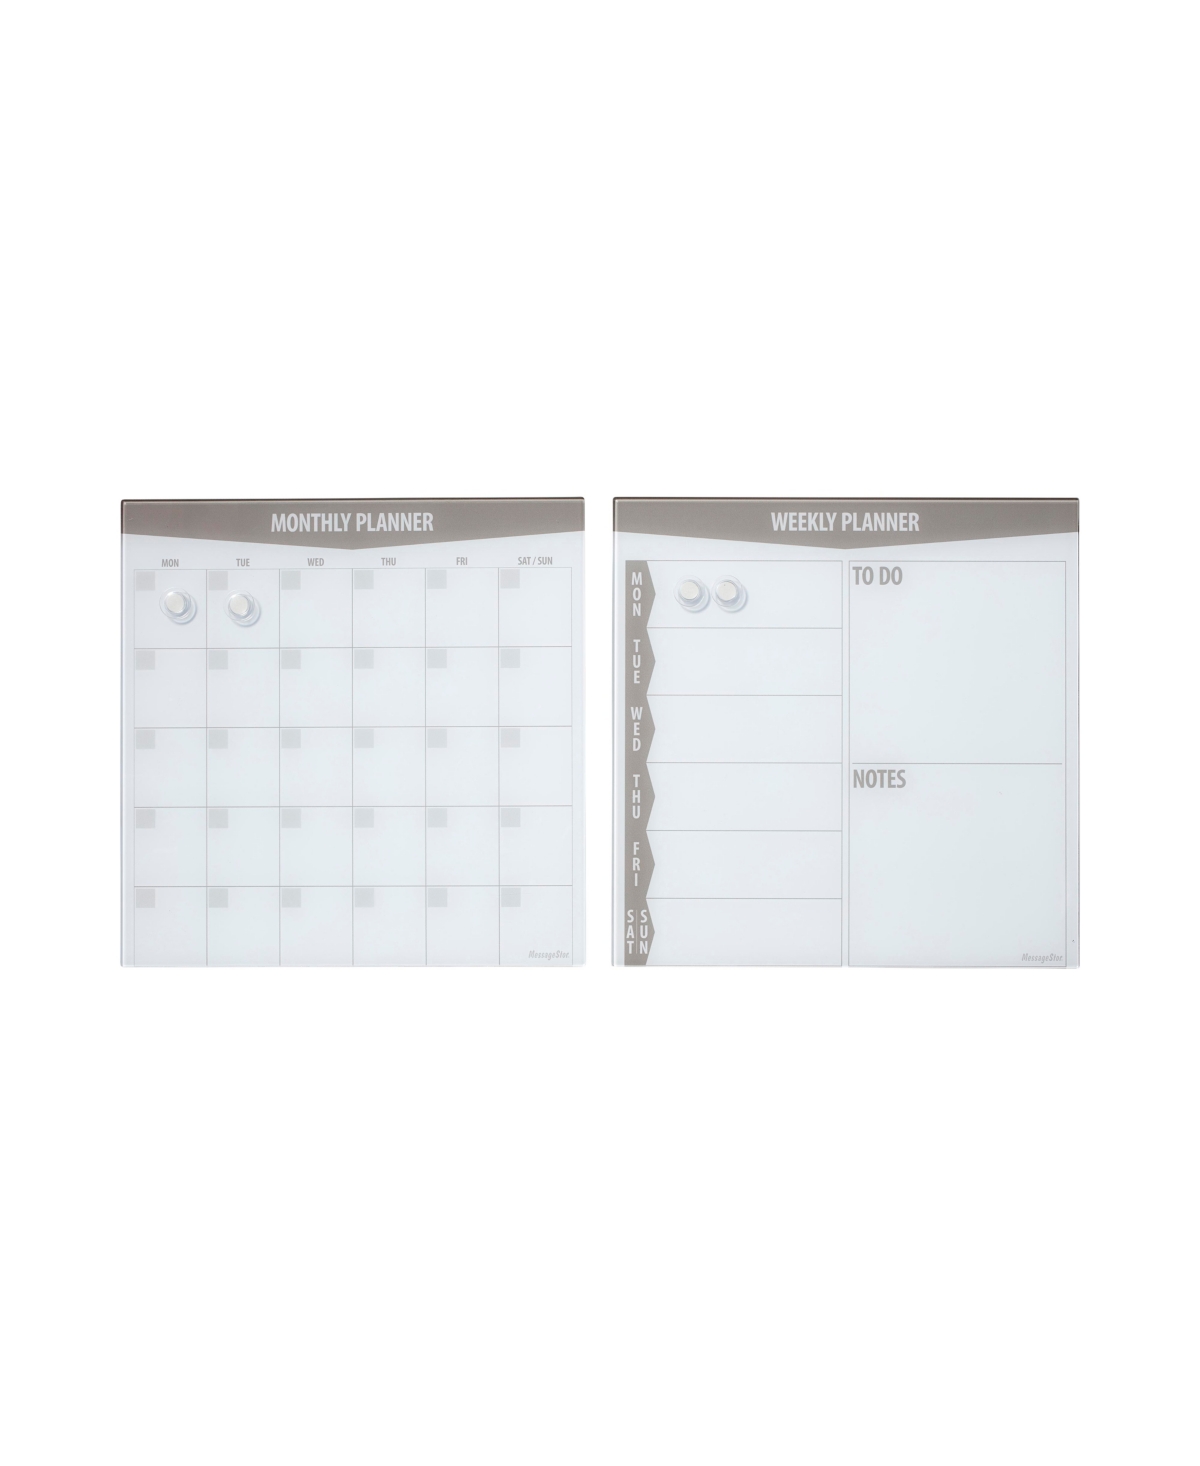 MessageStor Magnetic Dry-Erase Glass Board with Magnets, 17.5in x 17.5in, Wall-Mounted Whiteboard, Grey, 2-Pack - Grey